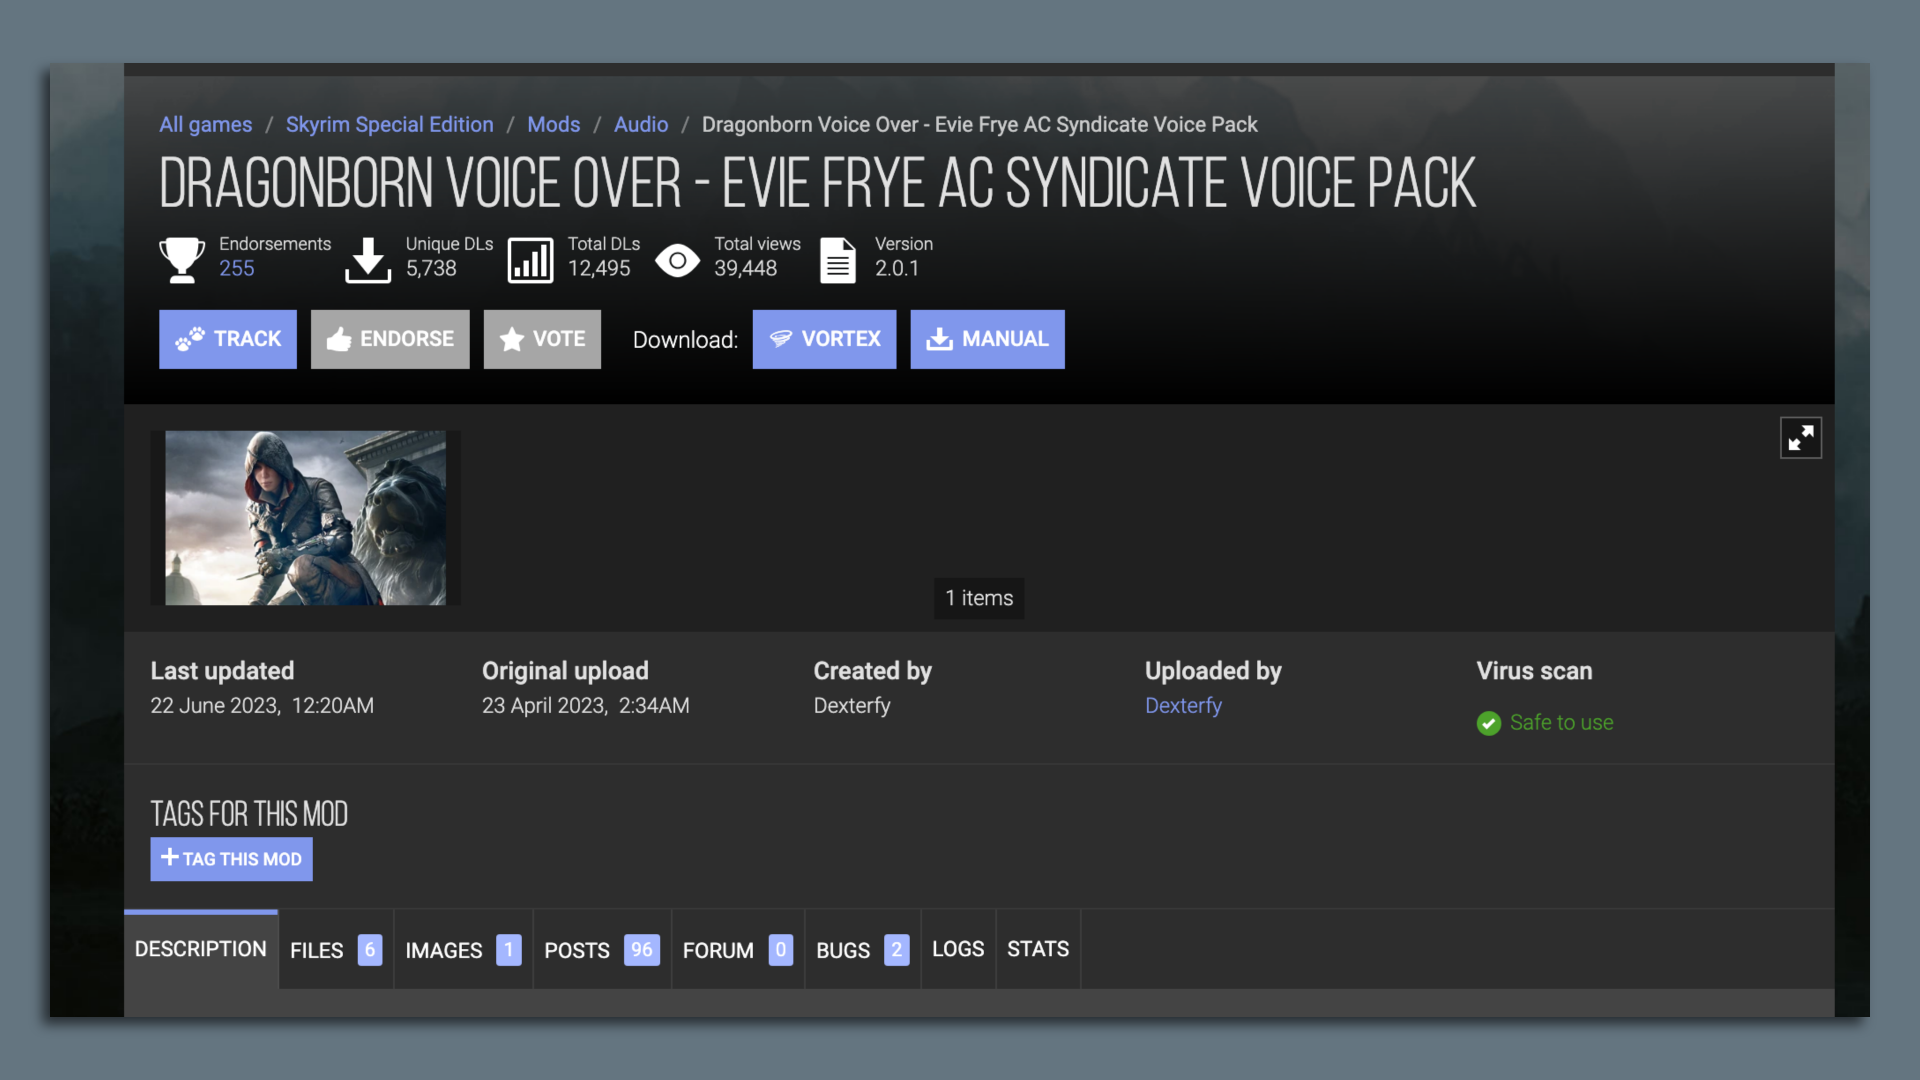 Screenshot of a web page describing a mode that puts Evie Frye’s voice in Skyrim.